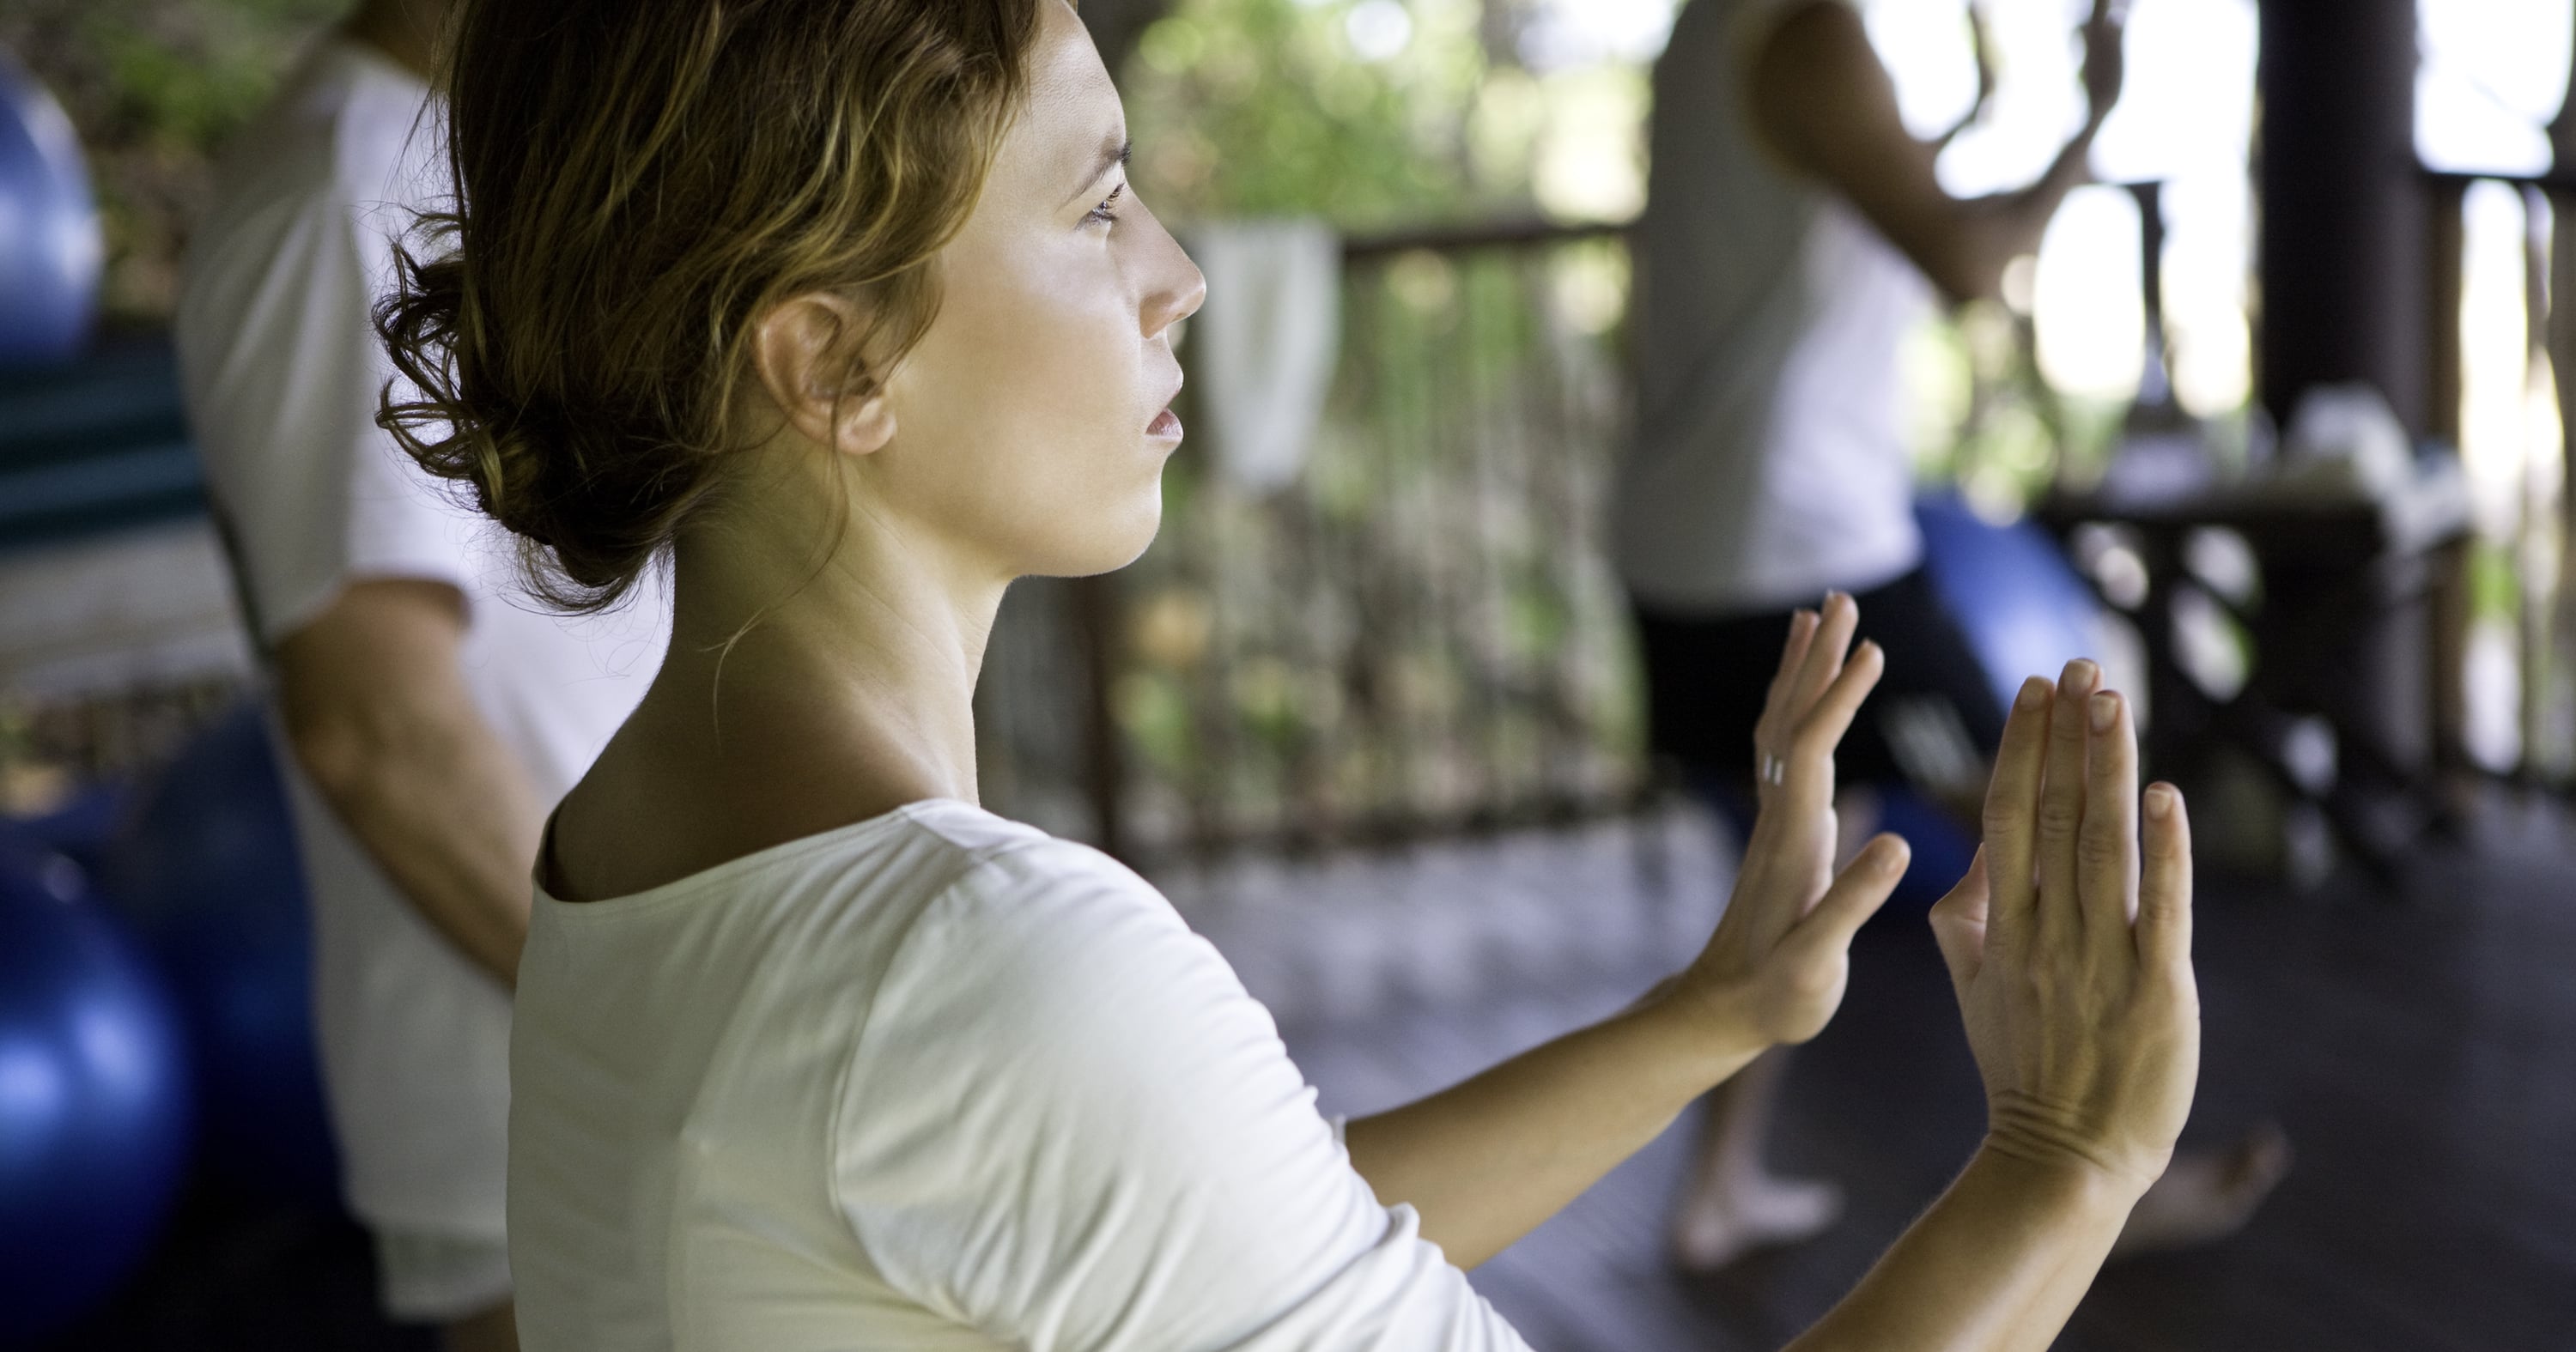 I Tried Tai Chi and Found My Center — But the Journey Was Humbling